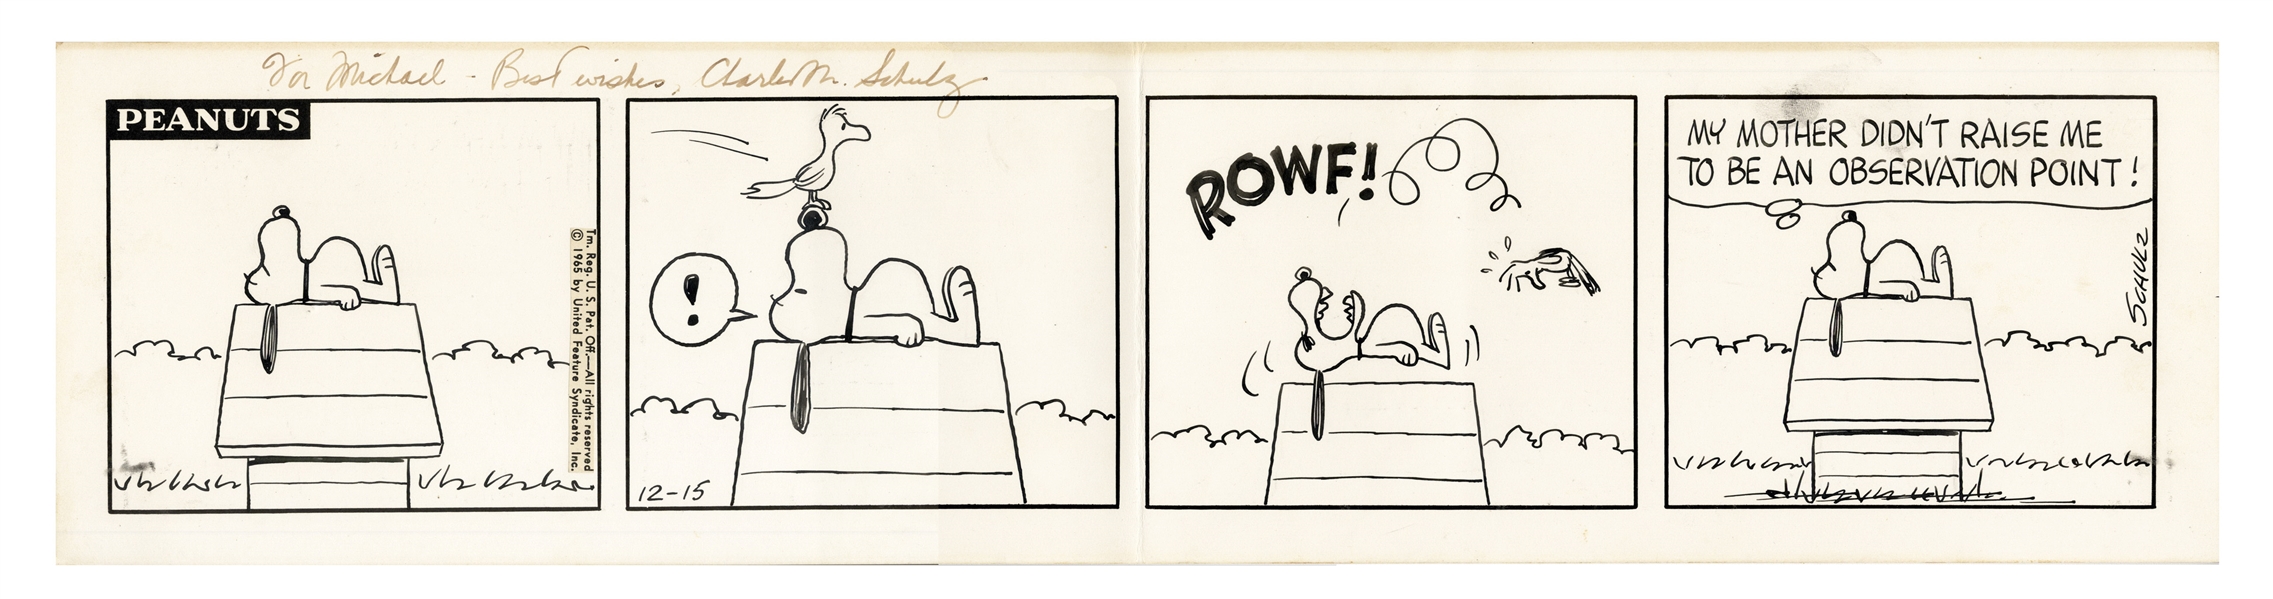 Charles Schulz Hand-Drawn ''Peanuts'' Comic Strip From 1965 -- In This Very Cute Strip, Snoopy Bares Teeth at a Seagull Who Lands on His Nose